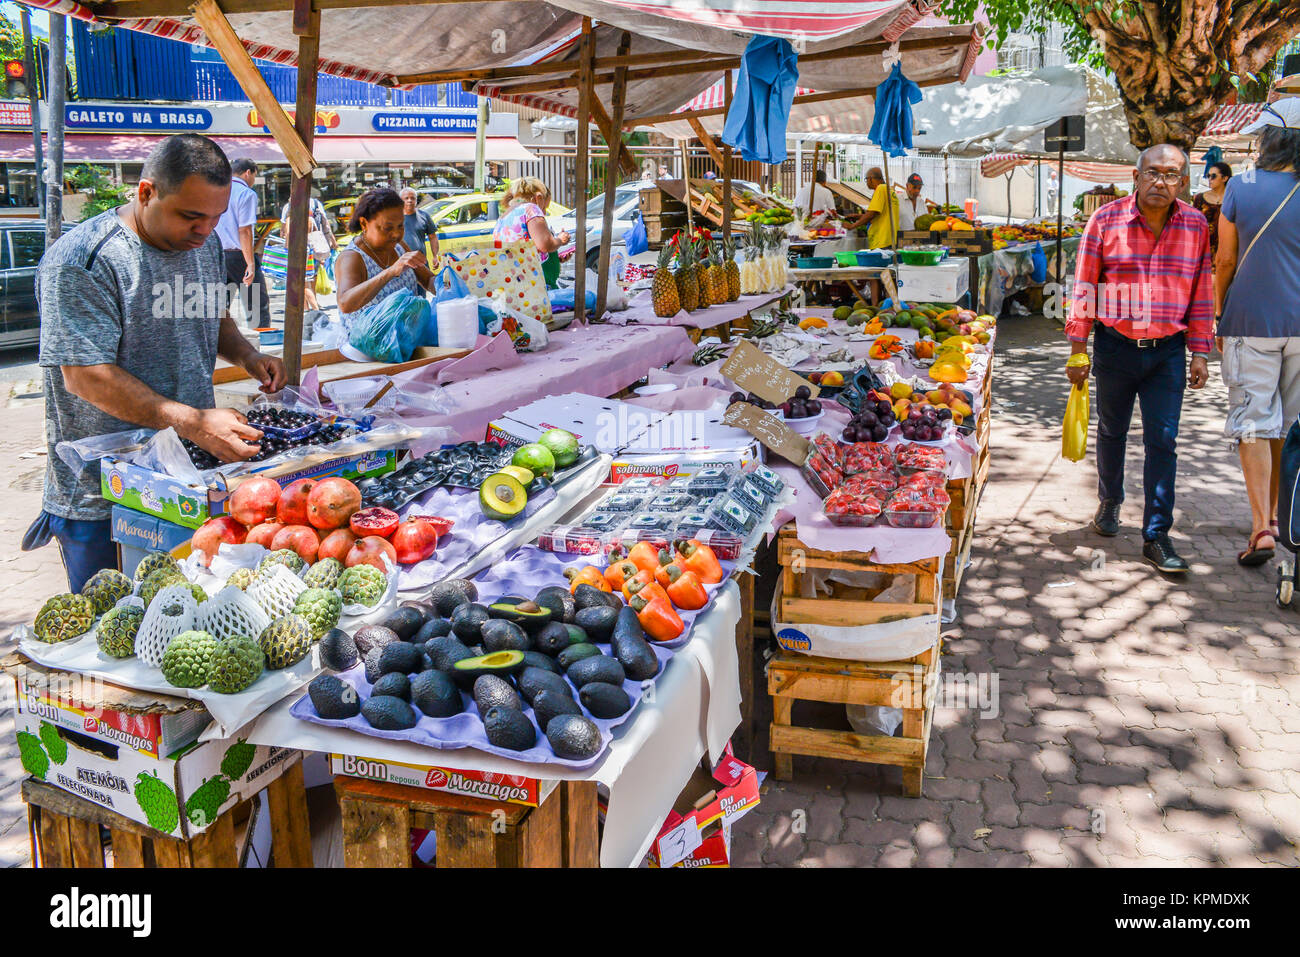 Assortment of various fruits and vegetables in a street market in Rio de Janeiro, Brazil Stock Photo